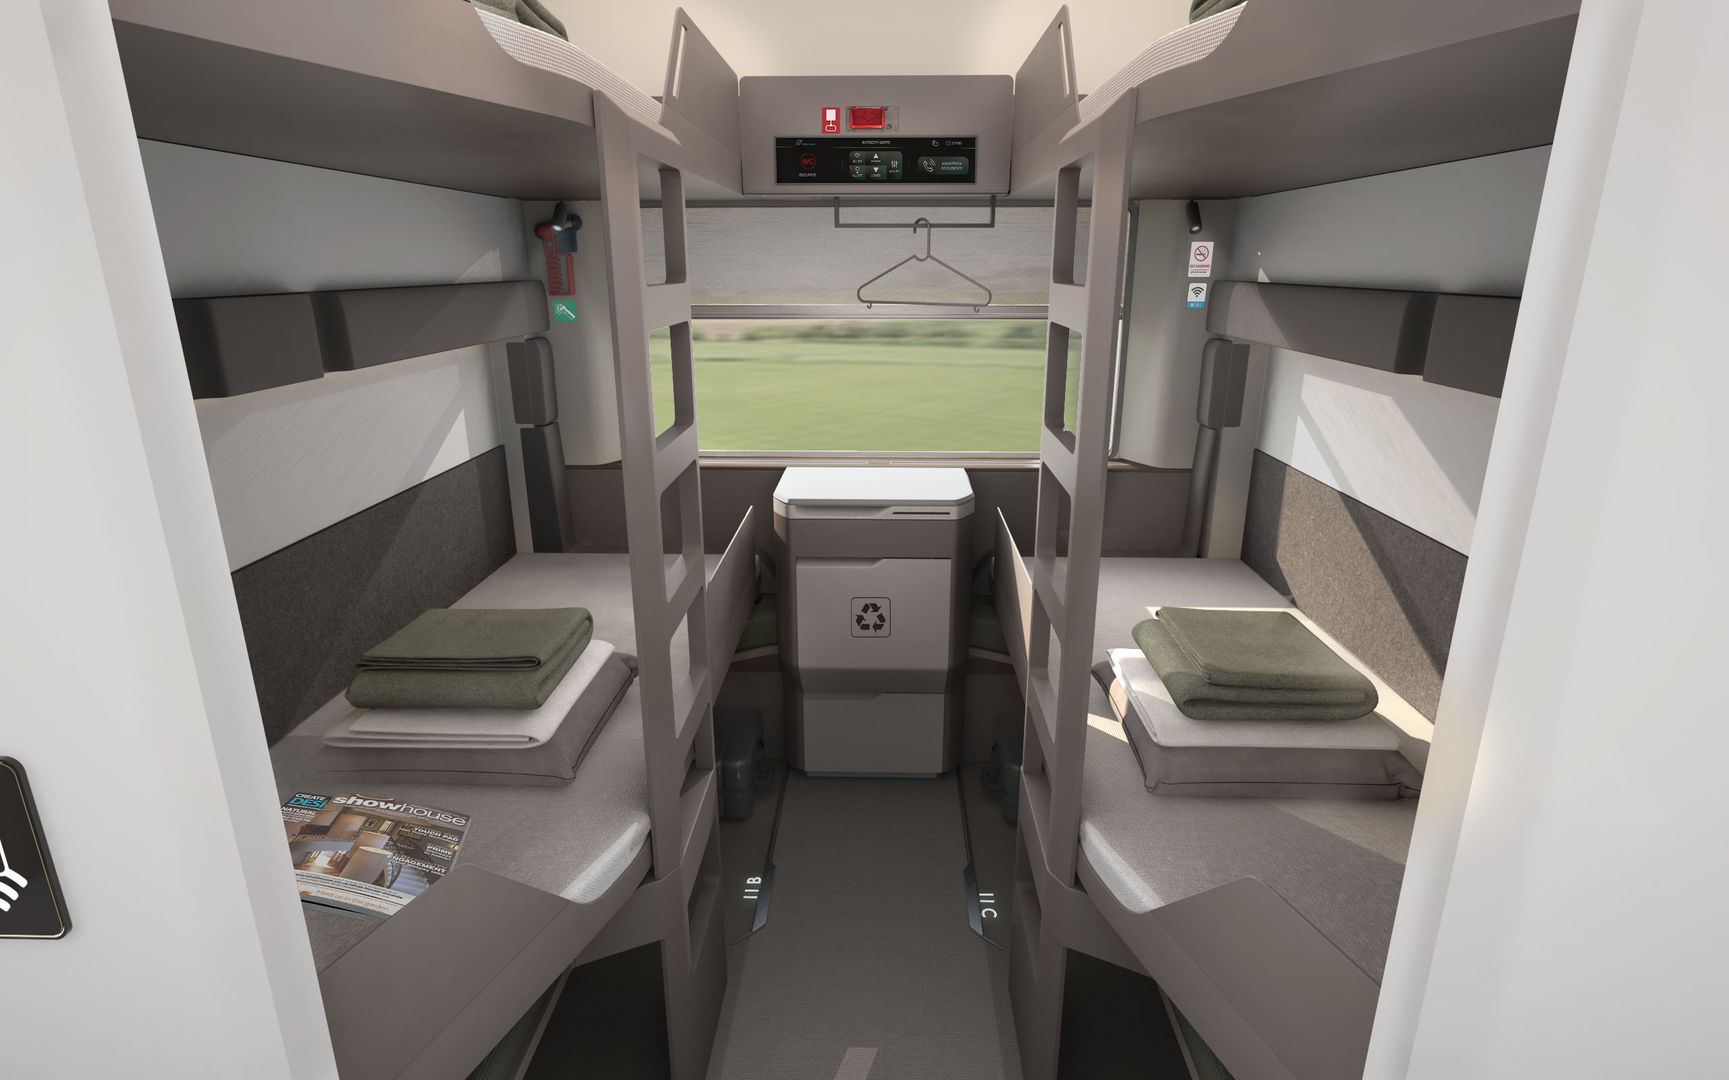 Rendering of a Comfort couchette for the Intercity Notte night service